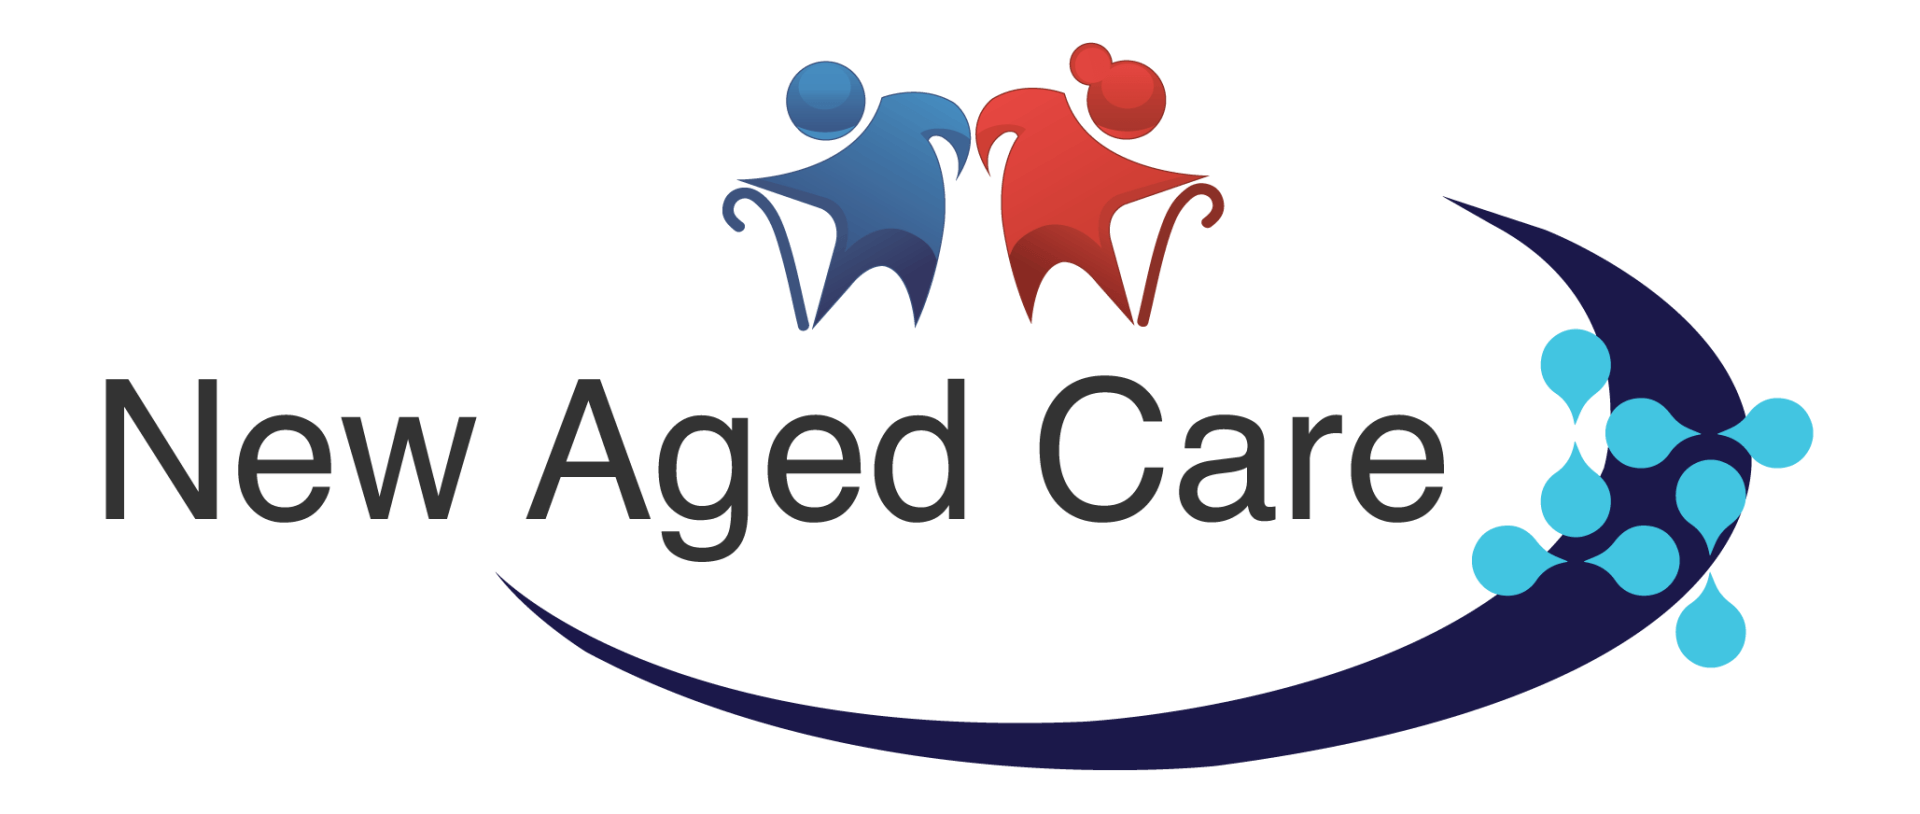 New Aged Care | Home